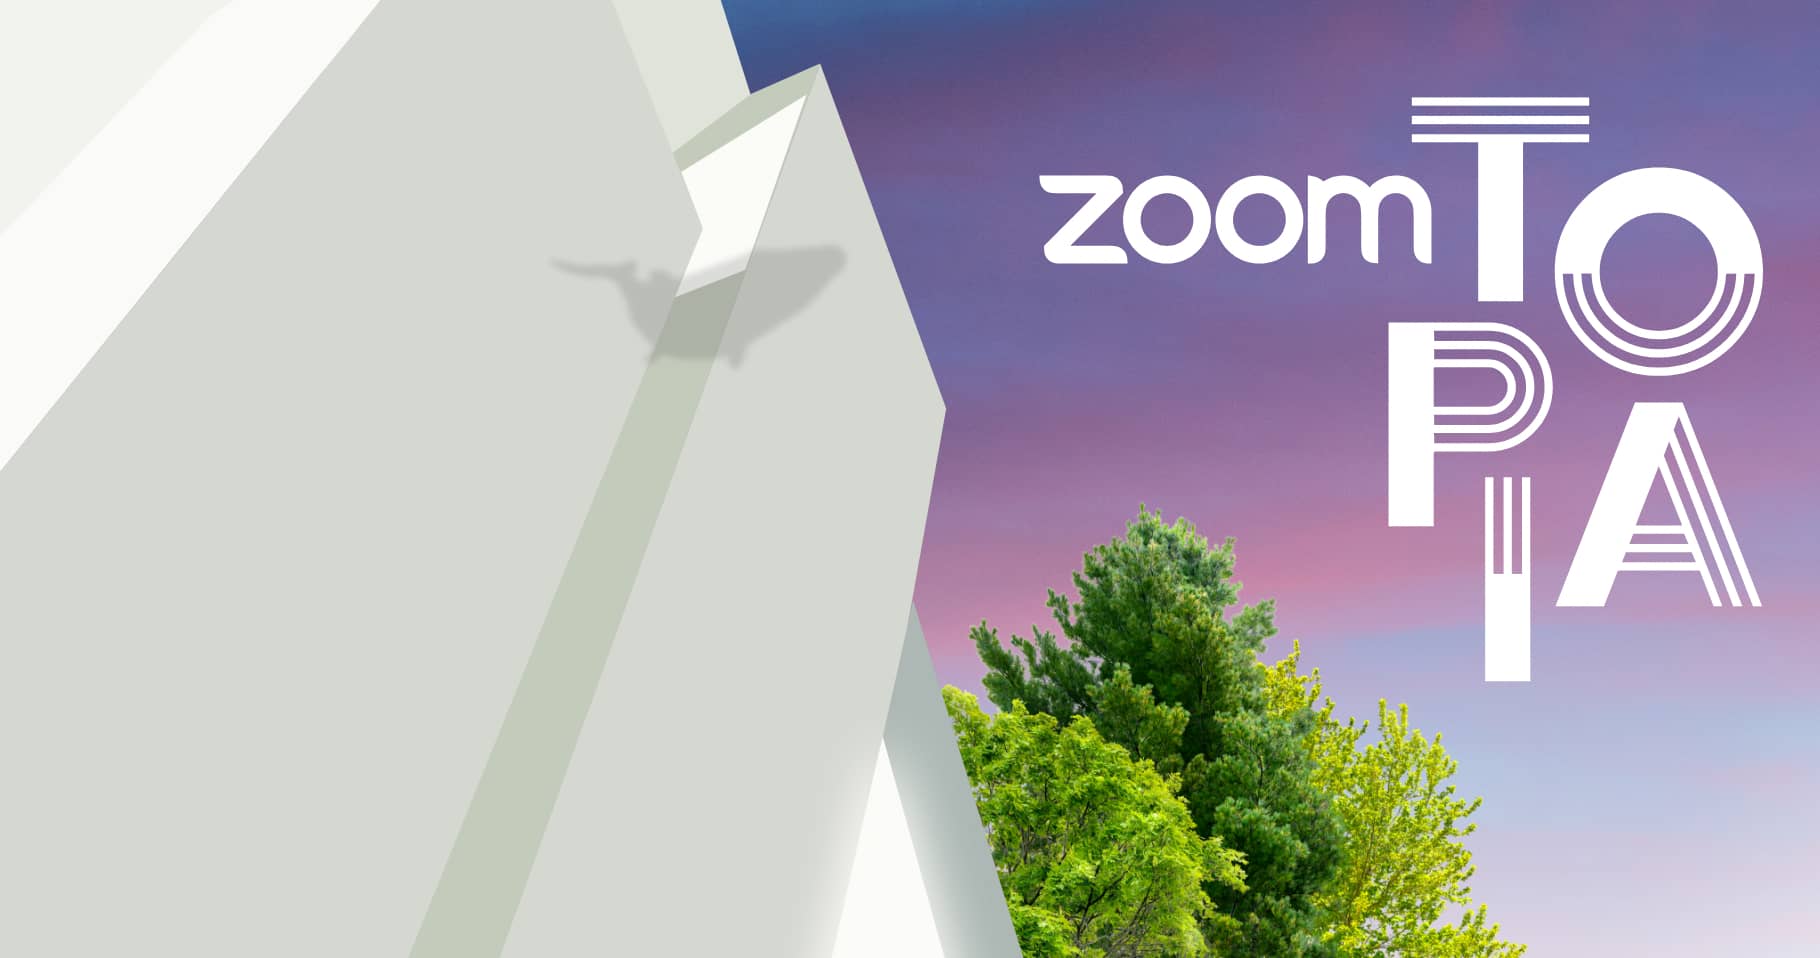 Save the New Date: Attend Zoomtopia 2021 Sept. 13-14